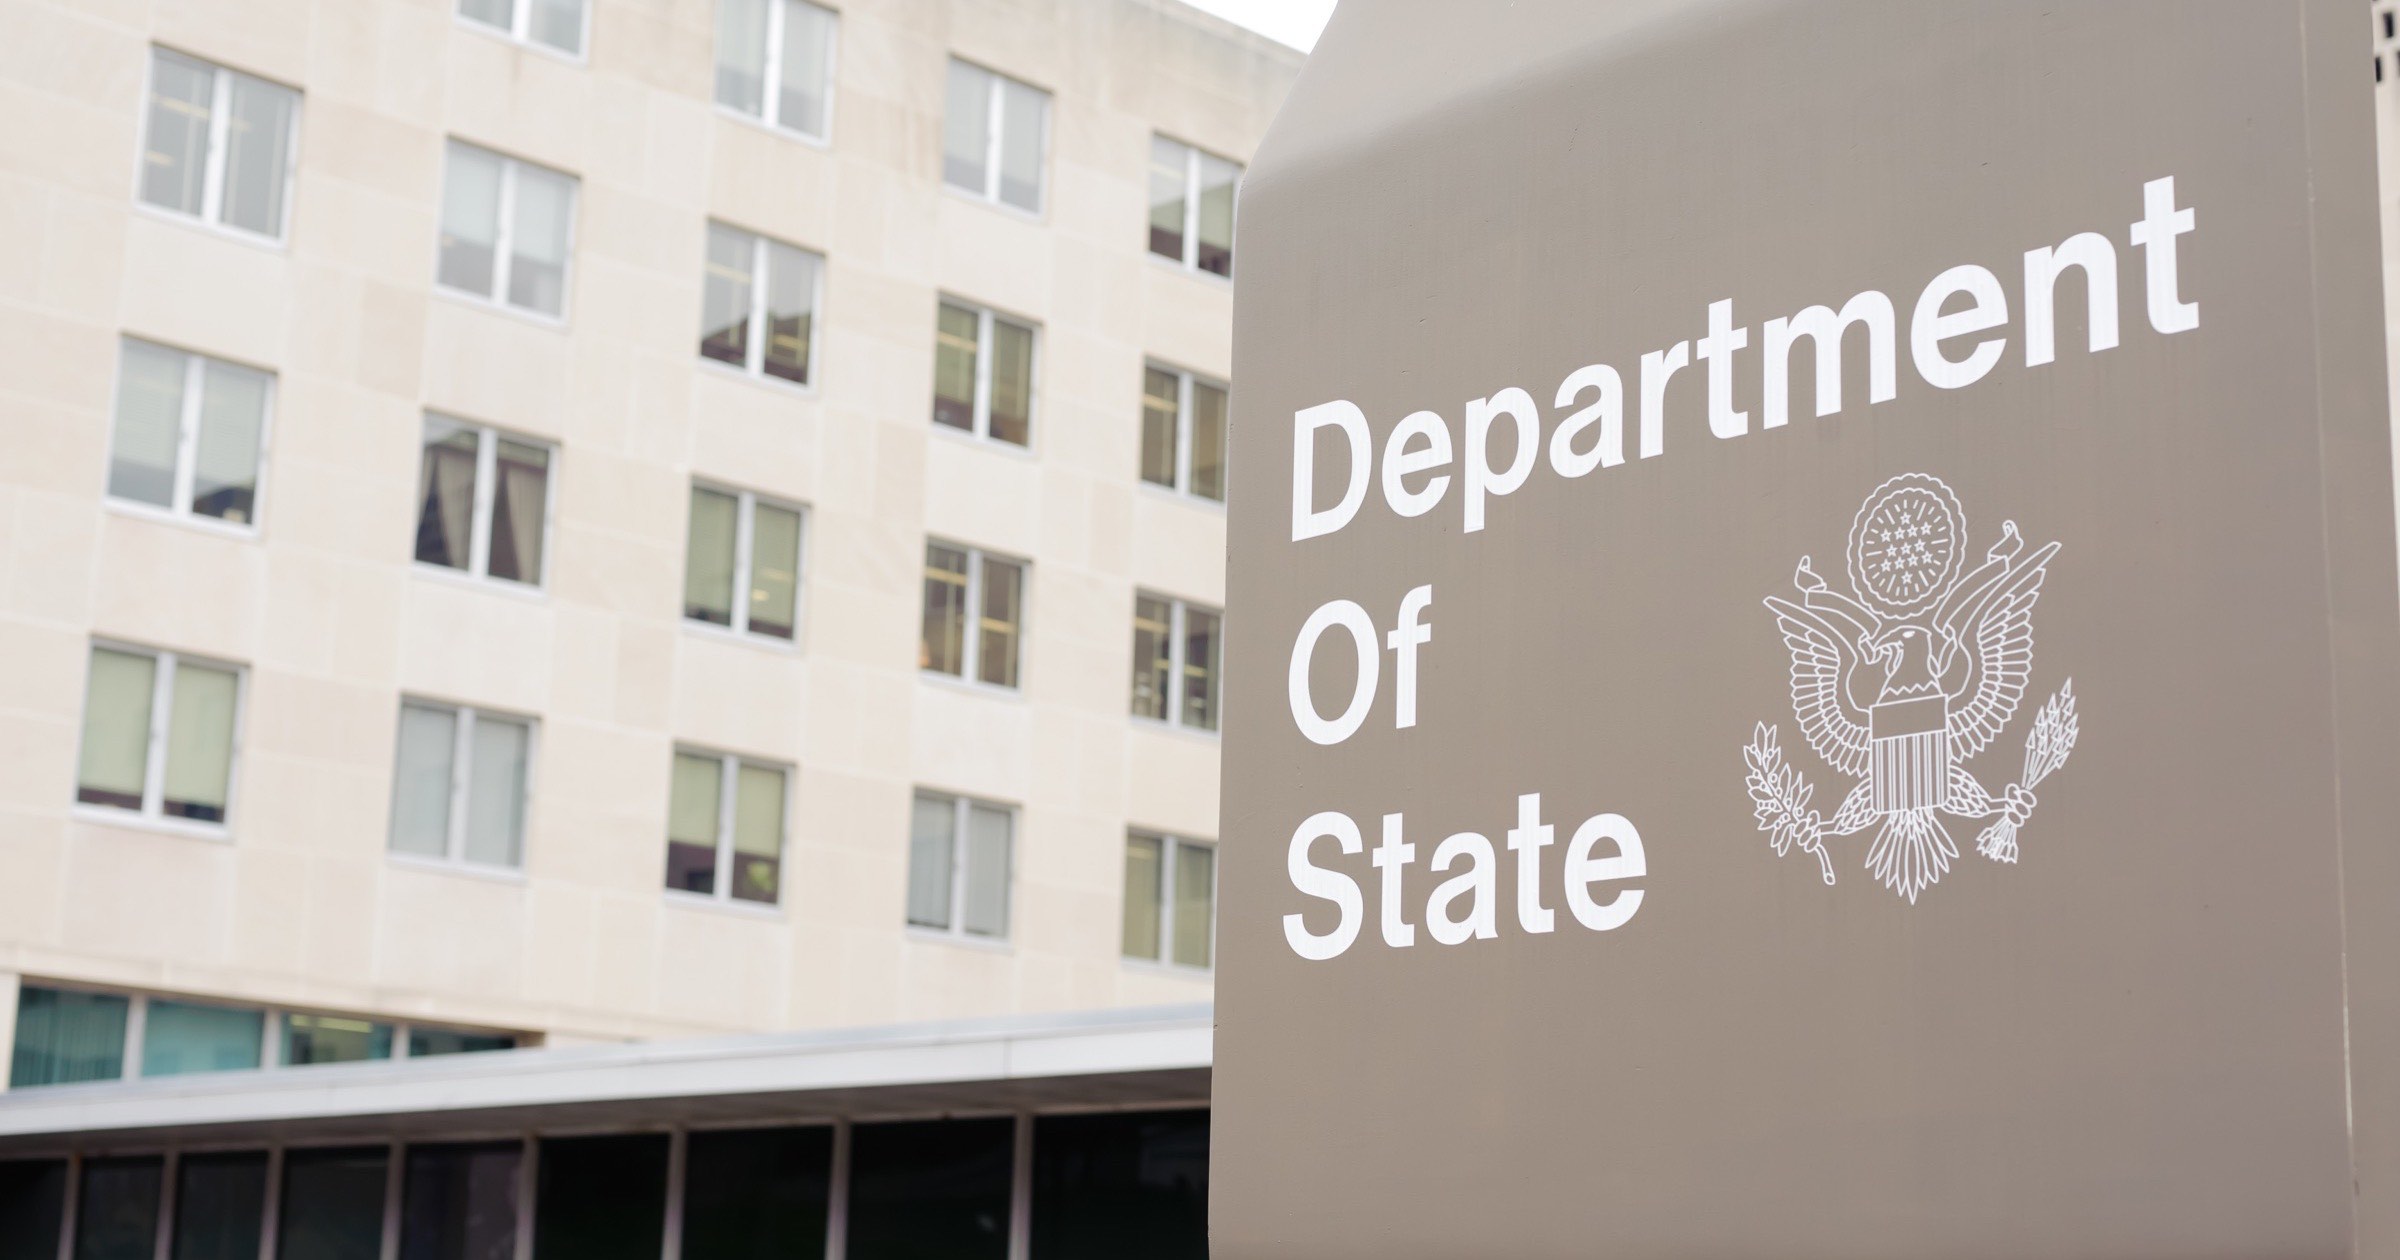 Department of state sign